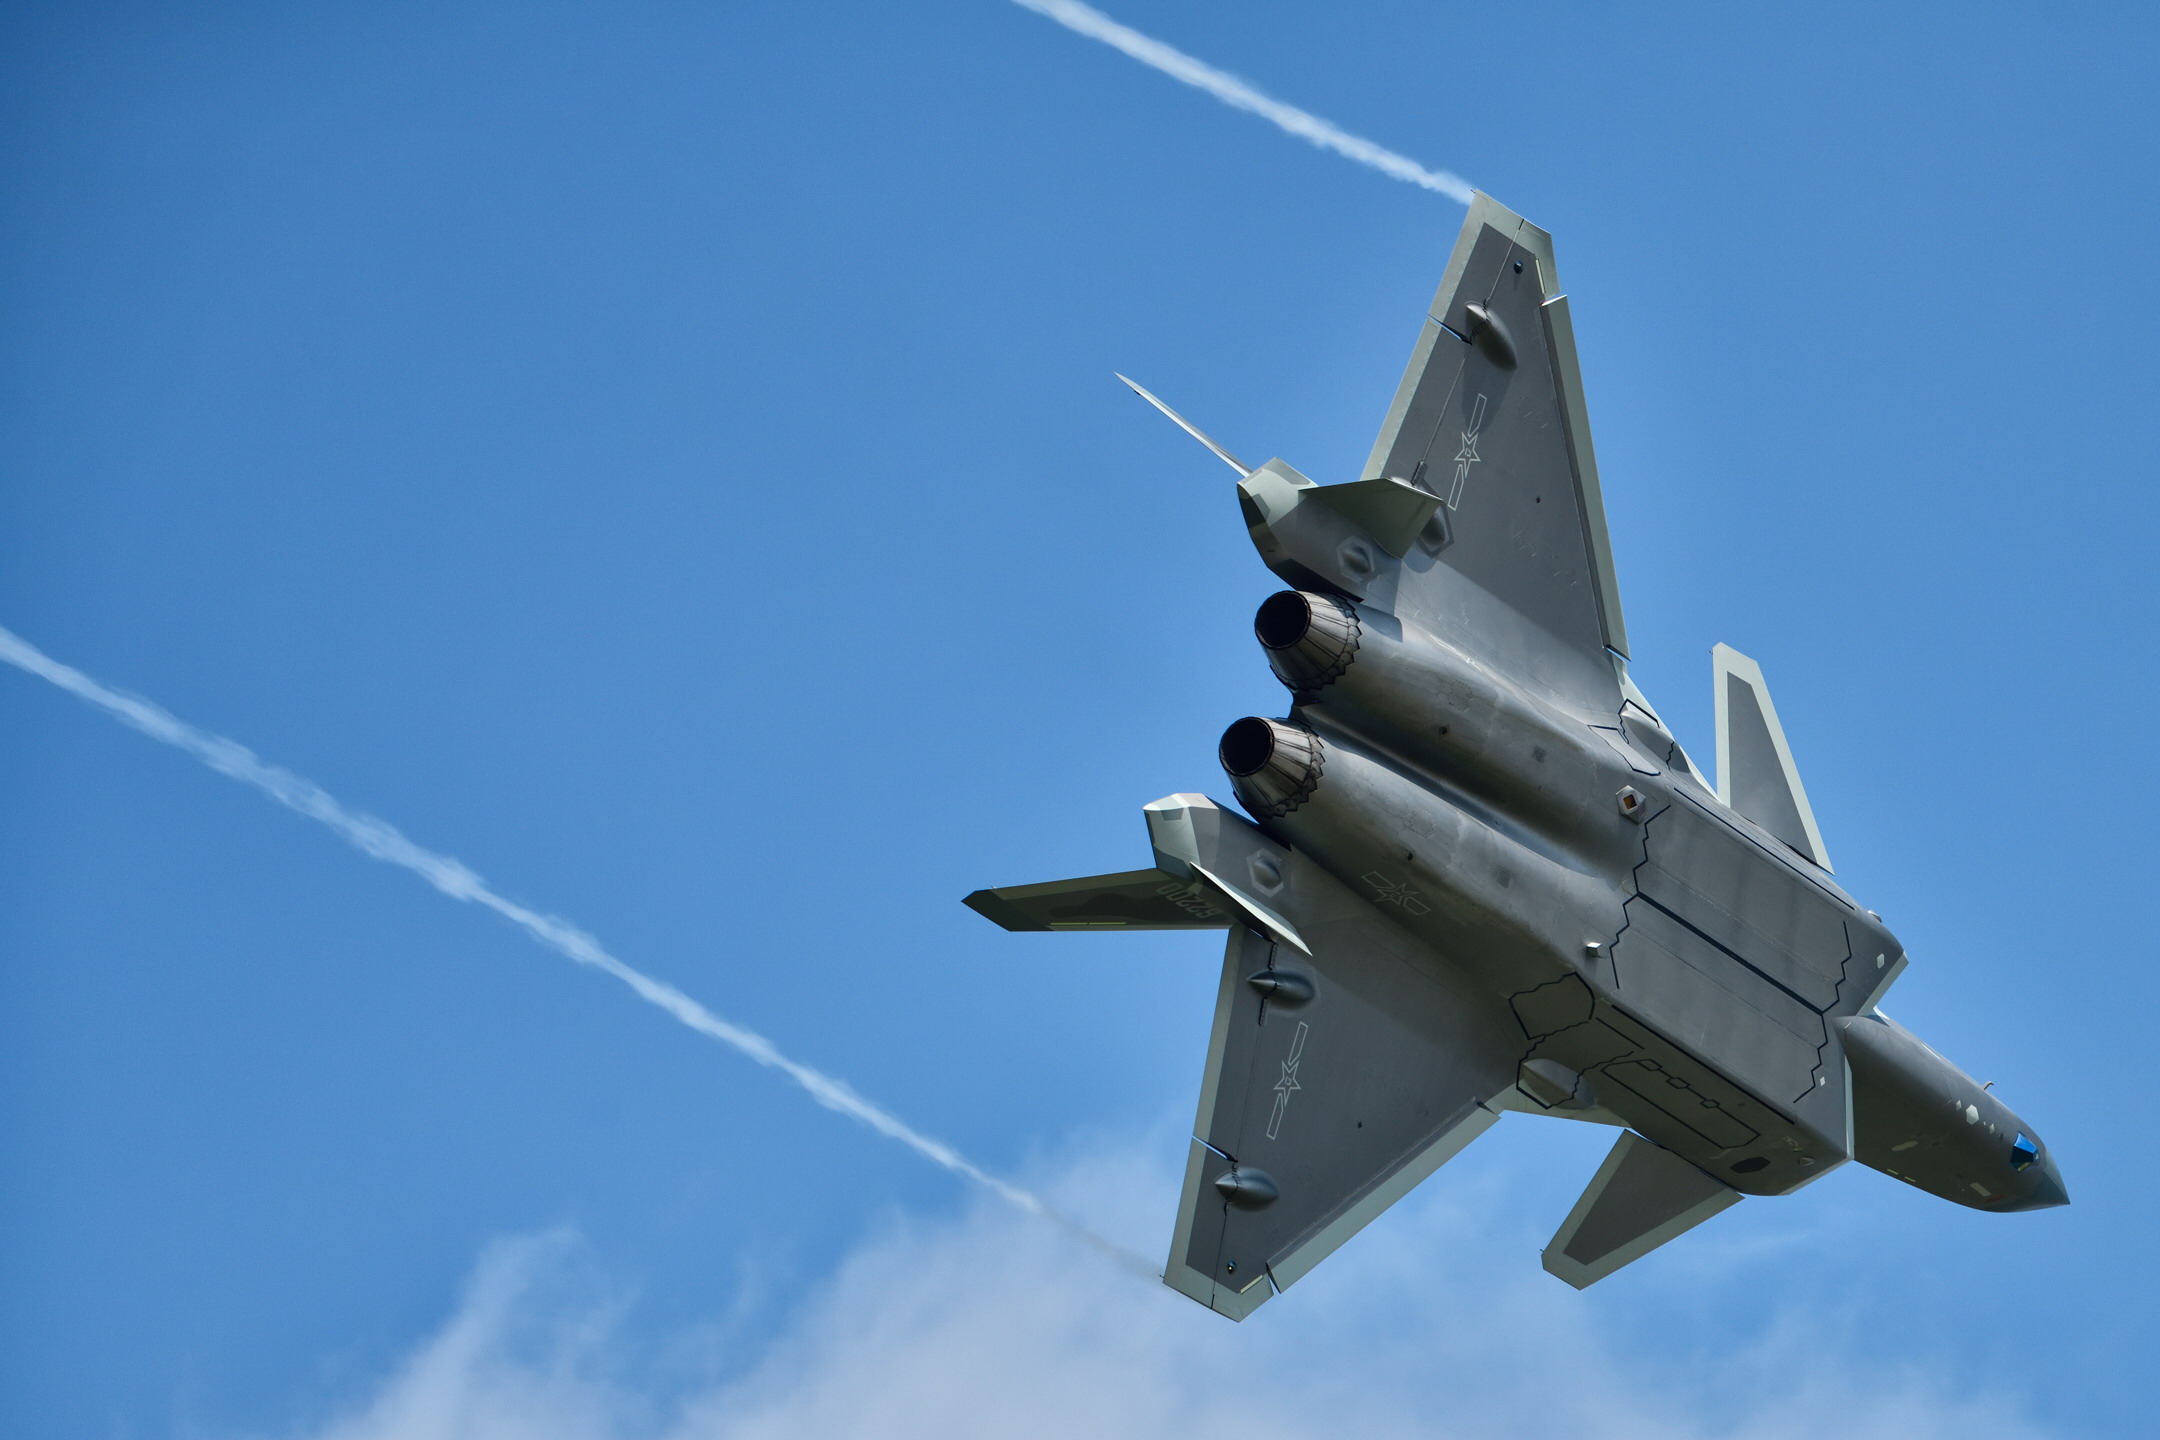 General 2160x1440 Chengdu J-20 PLAAF simple background minimalism aircraft flying sky clouds military military aircraft